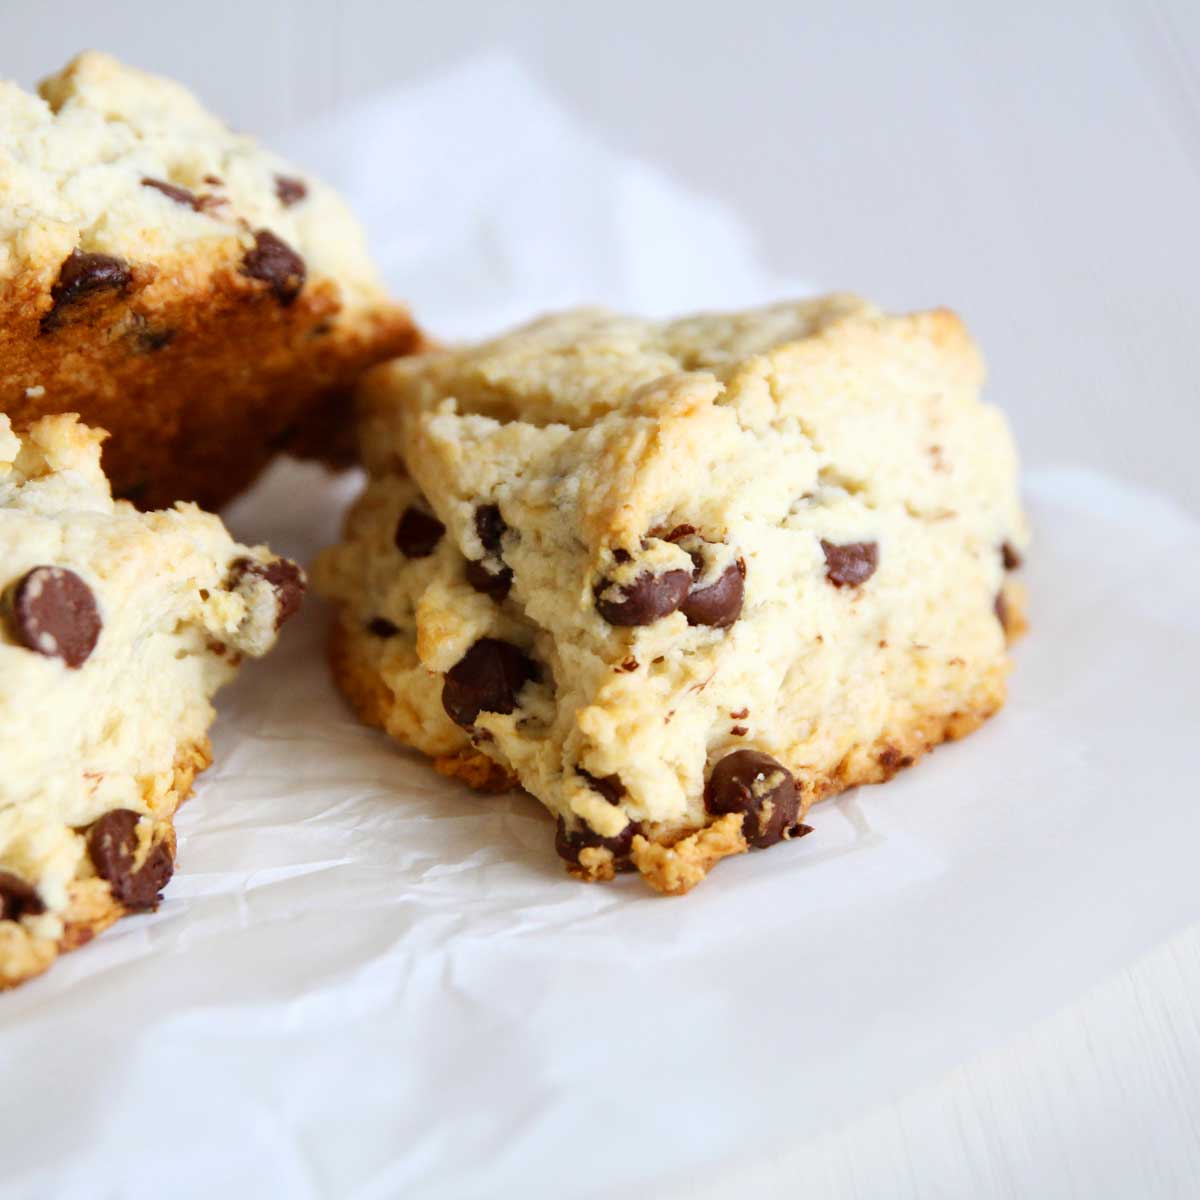 nut free vegan scones with cornstarch and chocolate chips -  the Best Melt-in-Your-Mouth Texture!